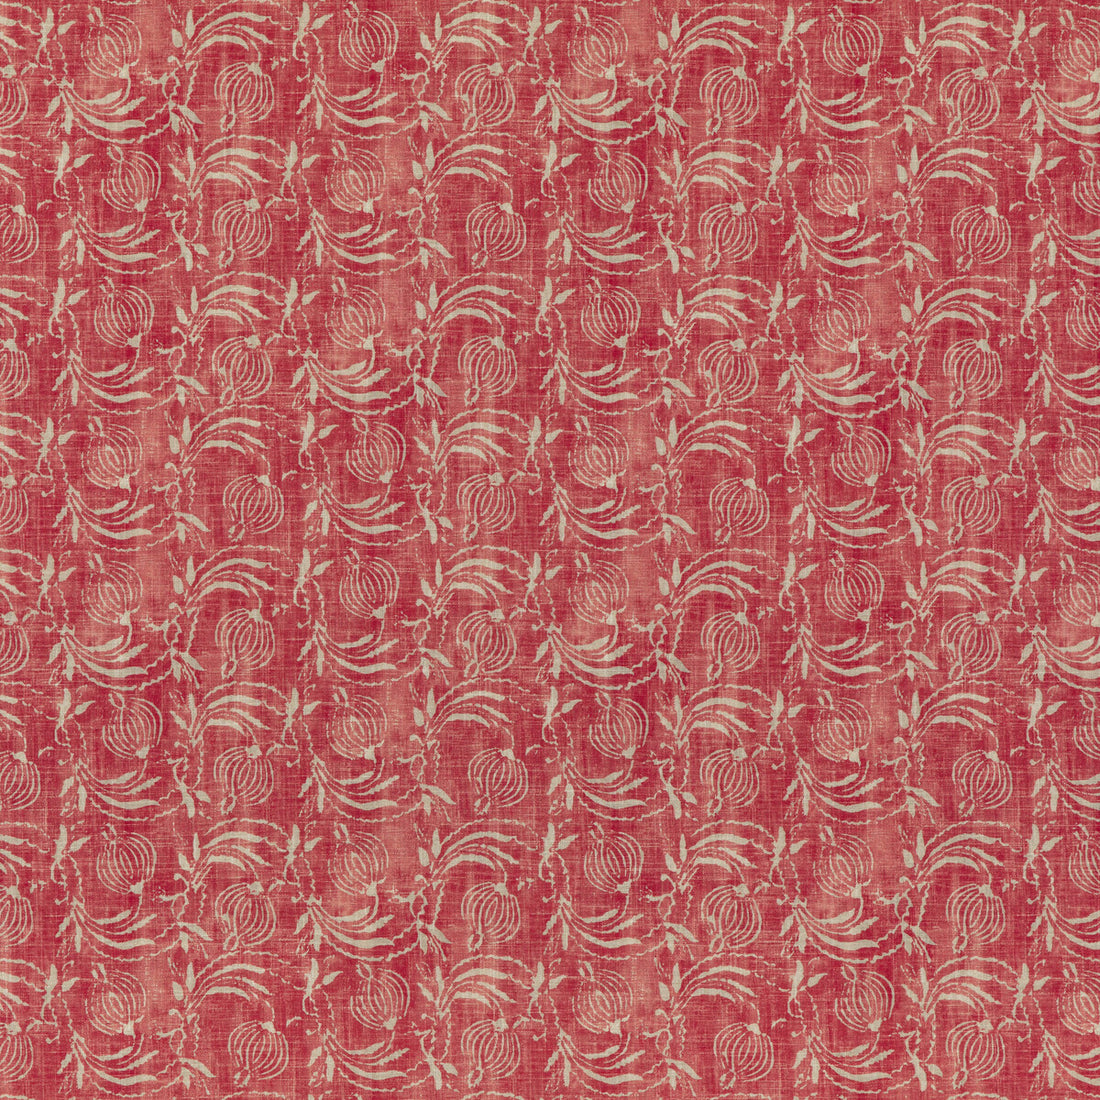 Pomegranate fabric in red color - pattern BP10825.1.0 - by G P &amp; J Baker in the Coromandel Small Prints collection